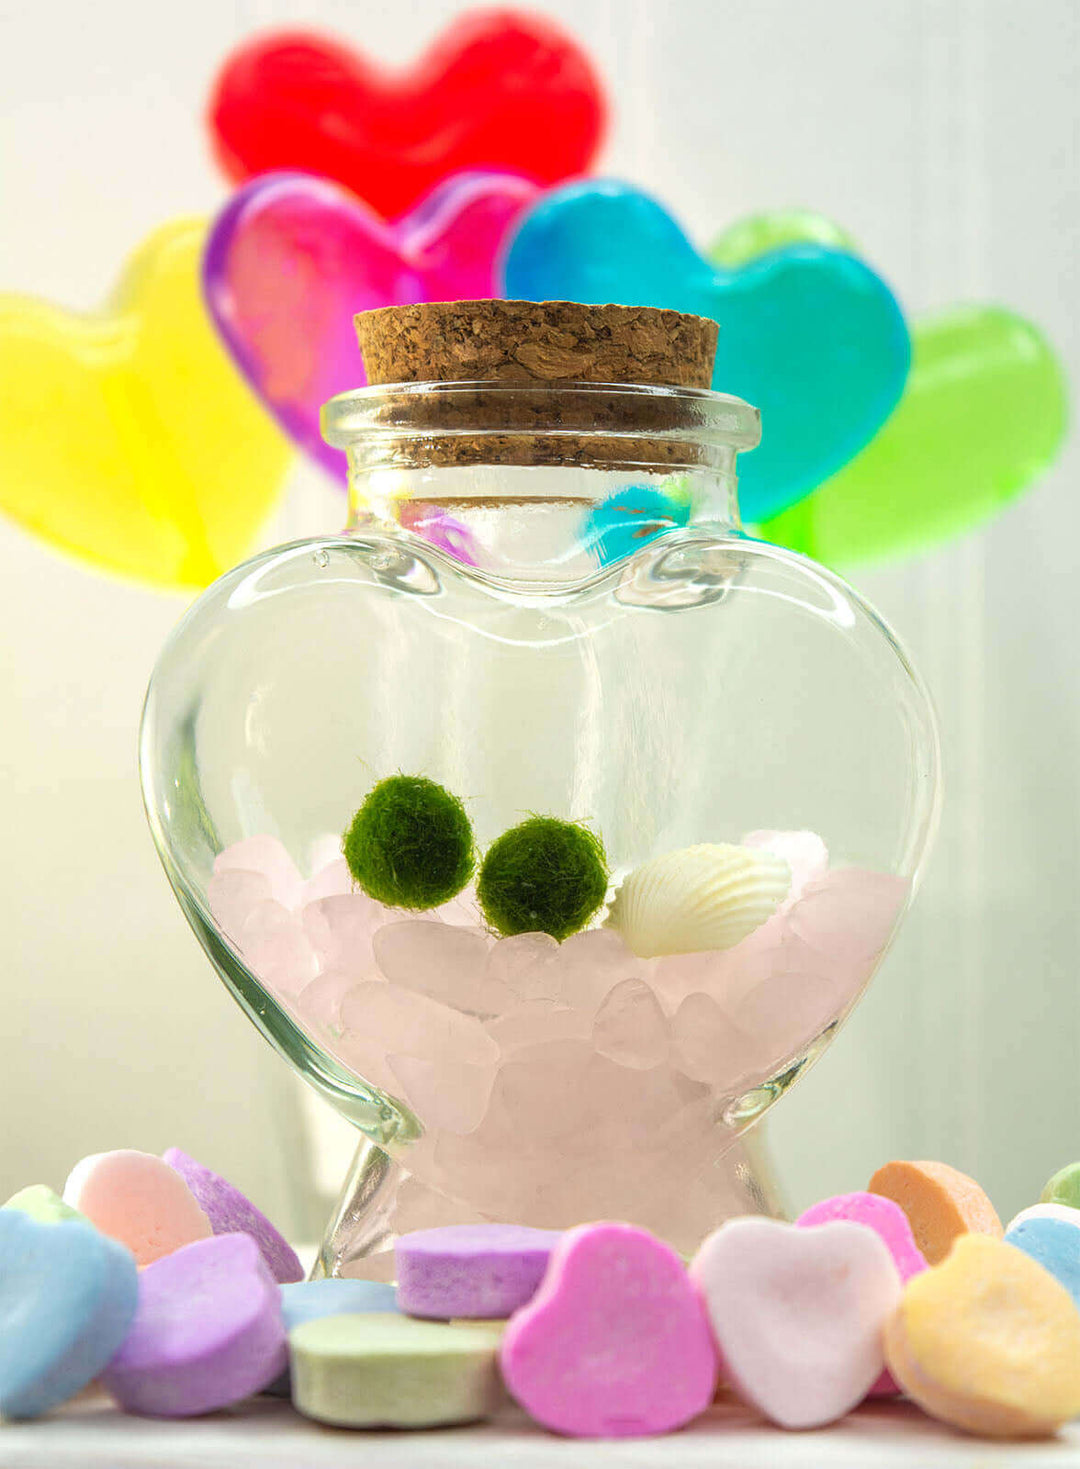 Heart-shaped glass bottle terrarium with two Nano Marimo Moss Ball Pets atop rose quartz pebbles, with a decorative shell, colorful background, and candy hearts in the foreground.